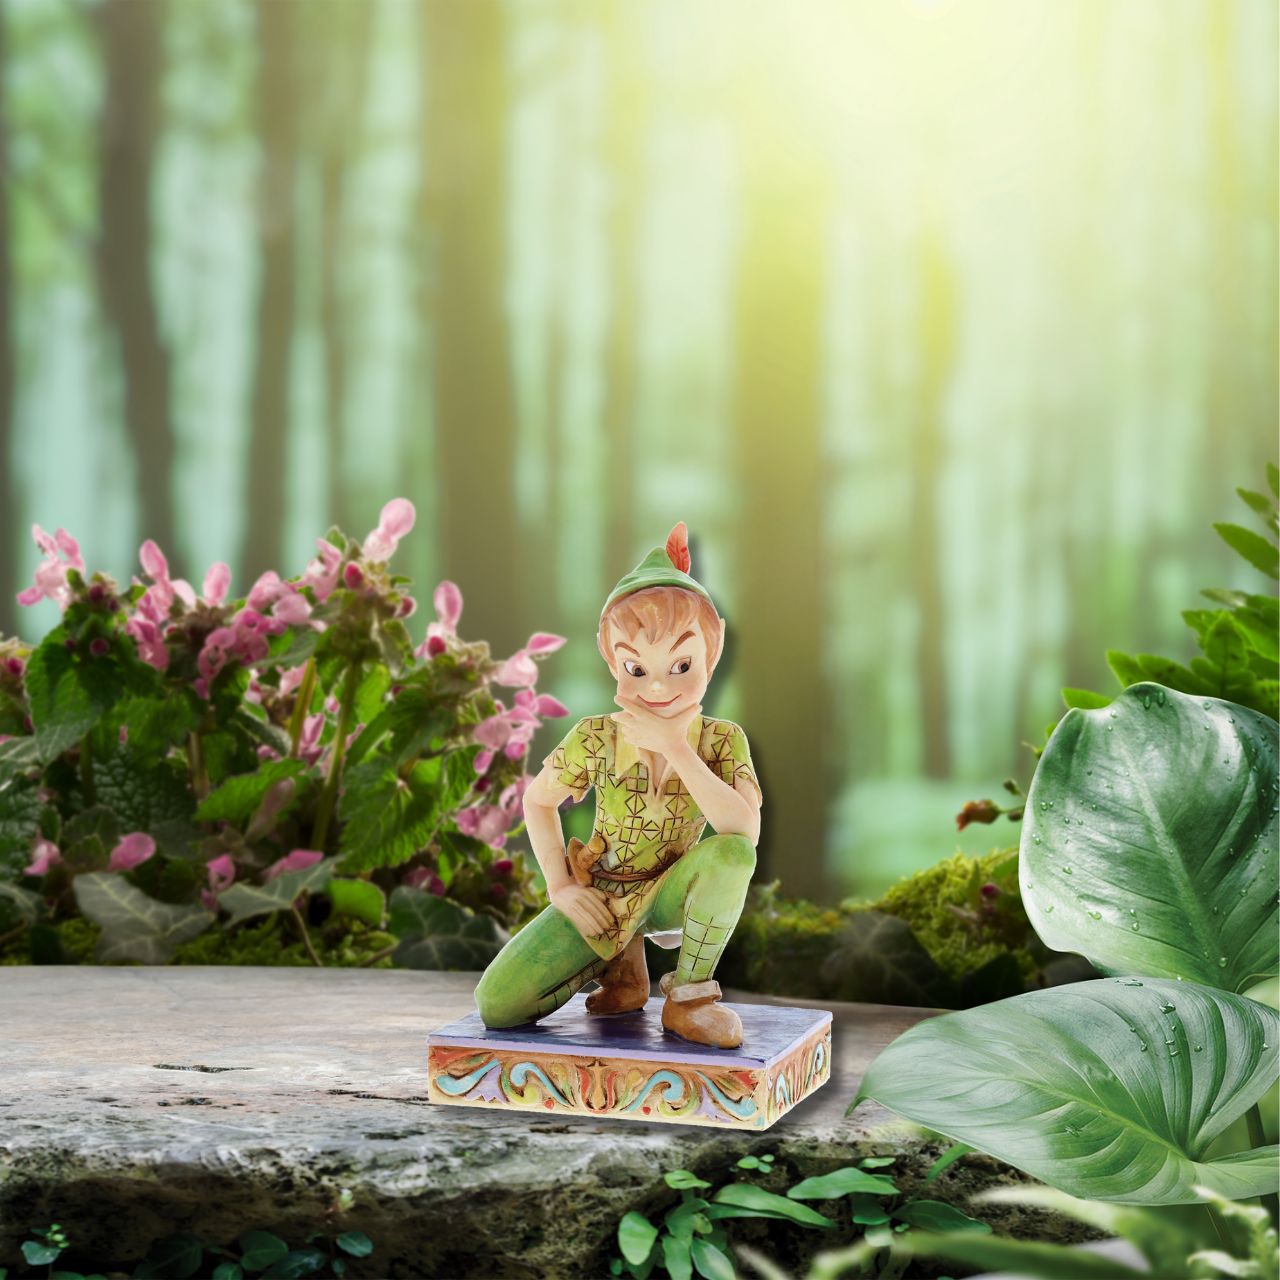 A mischievous boy who can fly and magically refuses to grow up, Peter Pan makes his debut as part of Personality Poses collection. Designed by award winning artist and sculptor, Jim Shore for the Disney Traditions brand.